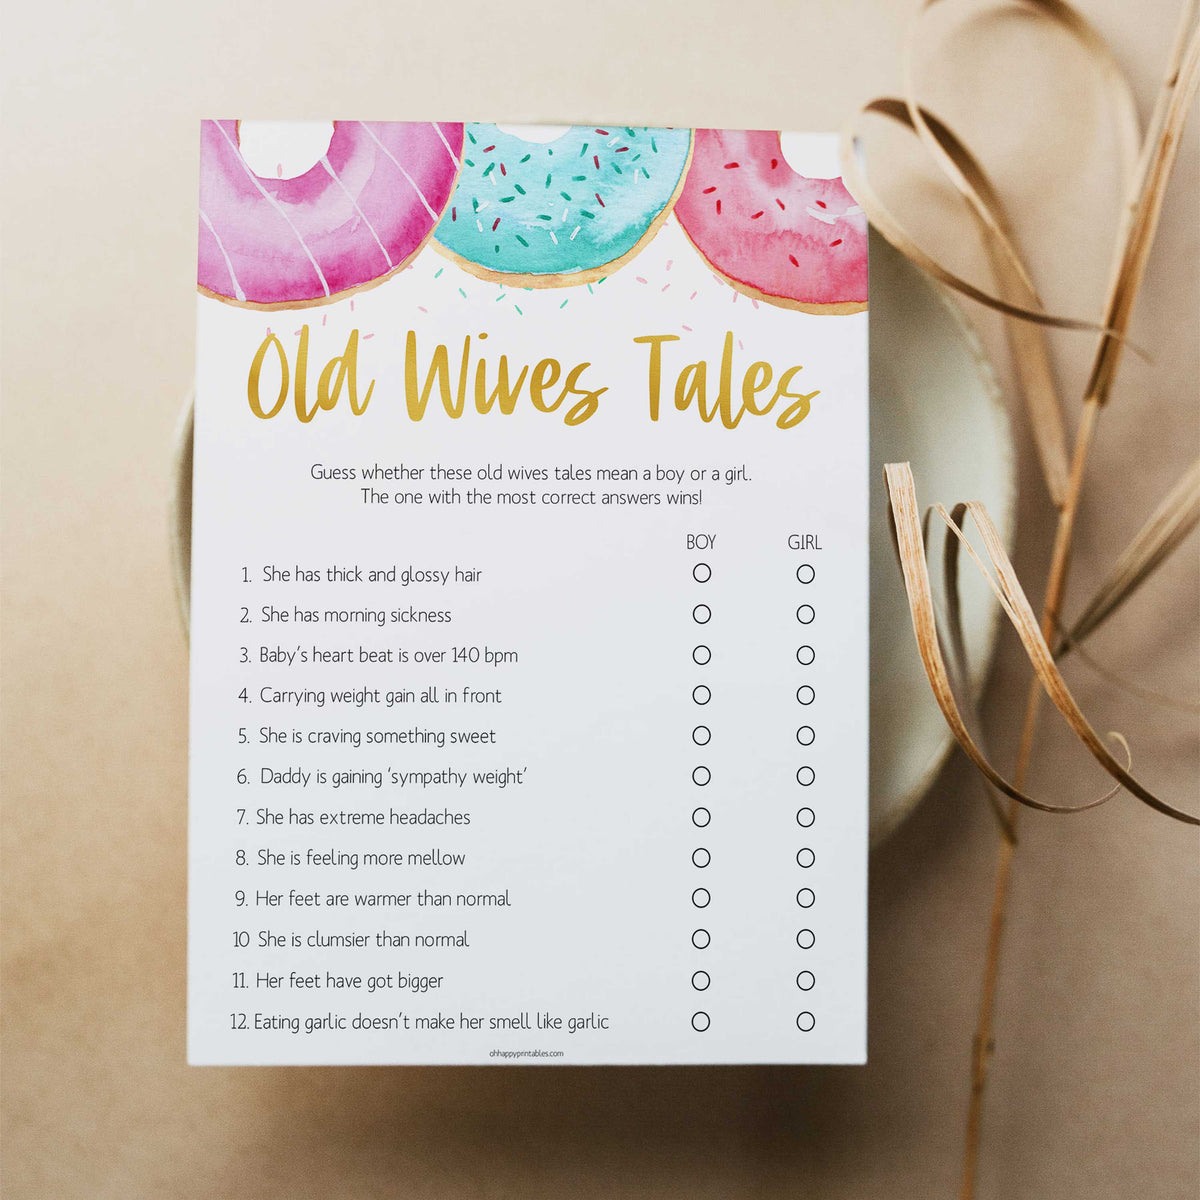 old wives tales game, Printable baby shower games, donut baby games, baby shower games, fun baby shower ideas, top baby shower ideas, donut sprinkles baby shower, baby shower games, fun donut baby shower ideas